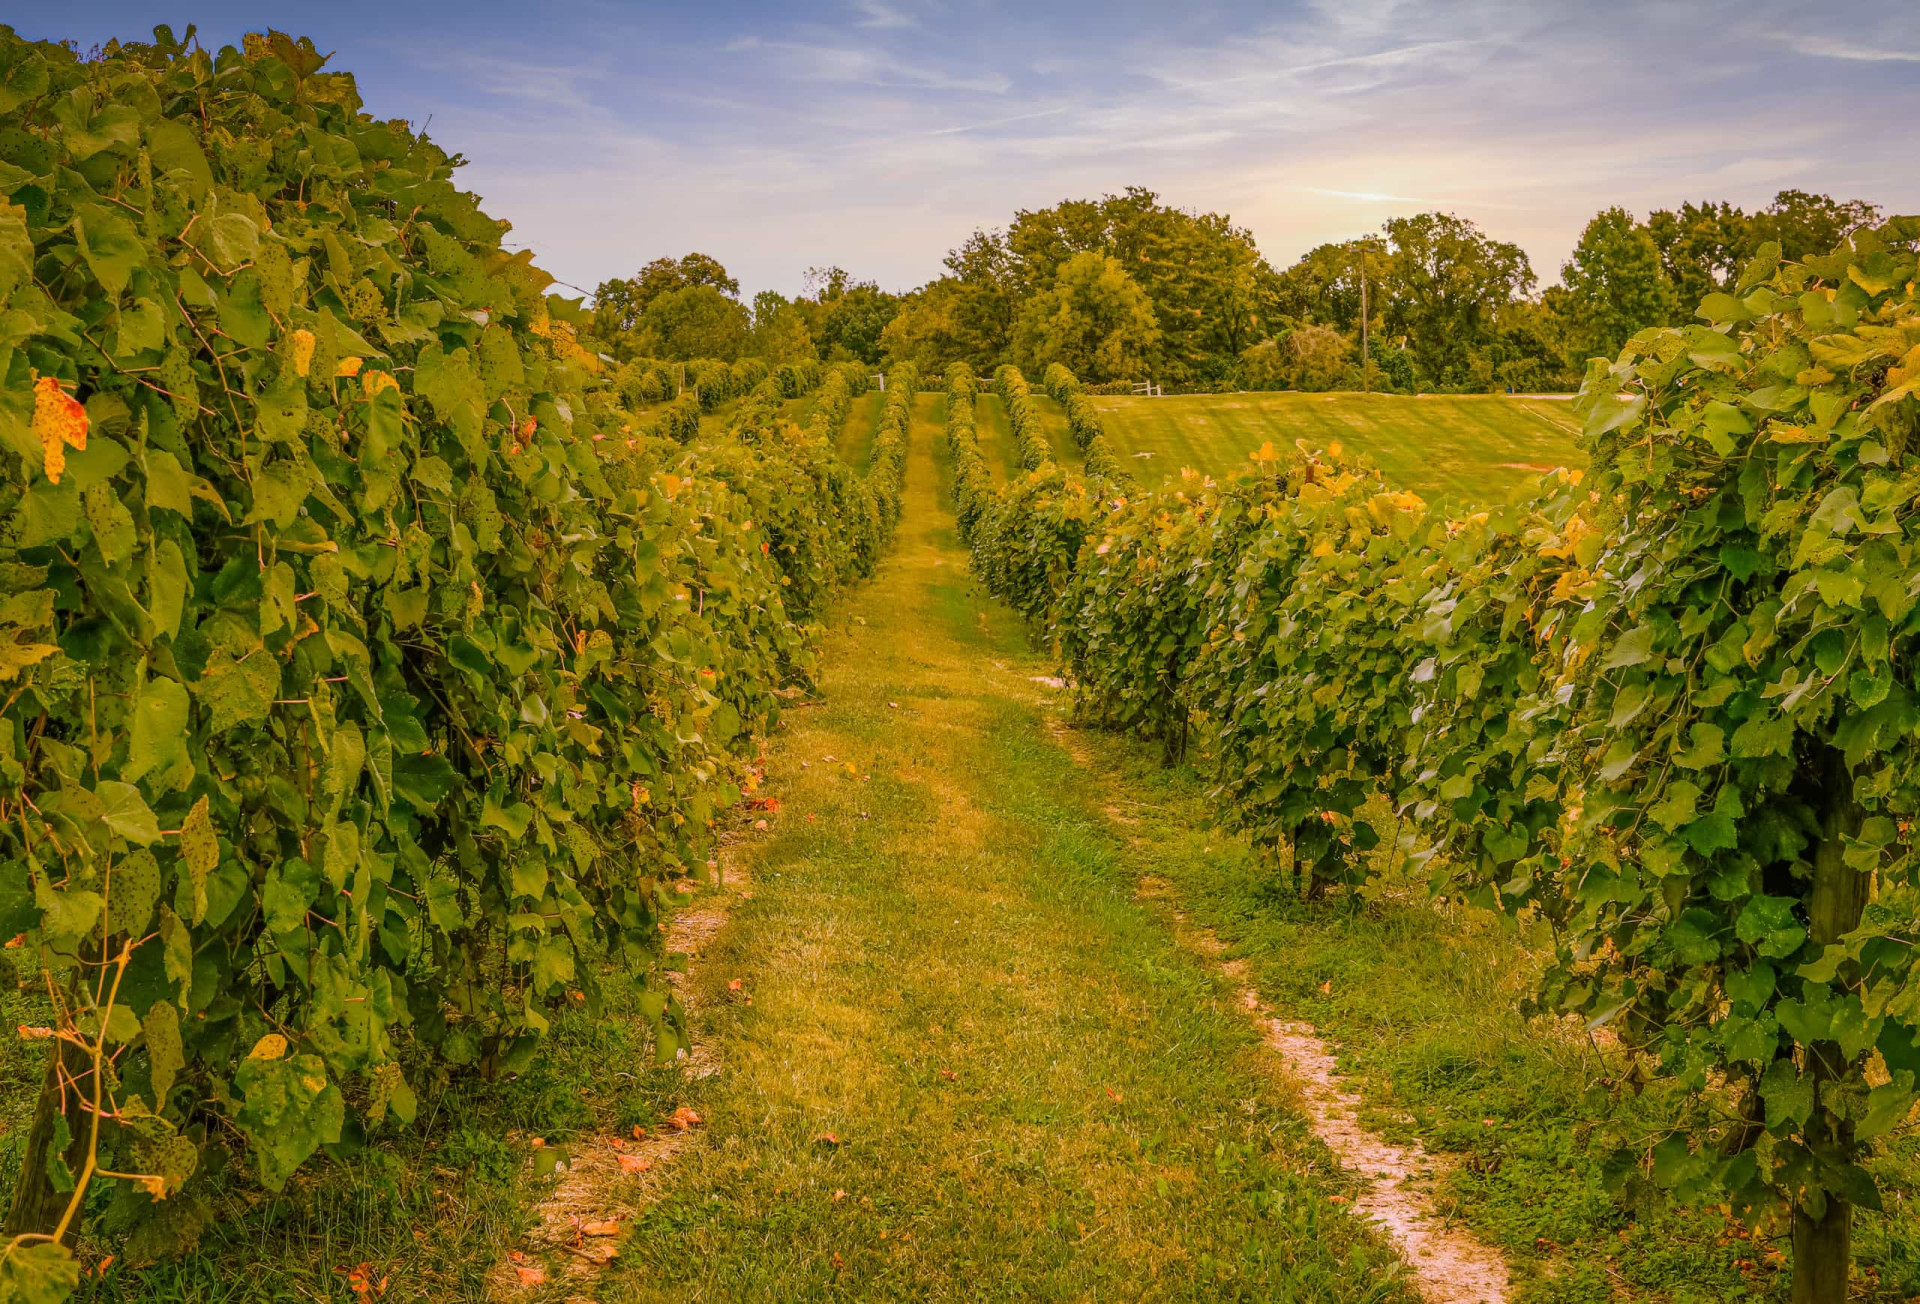 <p>German winemakers arrived in the Hermann region, west of St. Louis, way back in the 1800s. Today there are many wine estates in Missouri, and wine tours through Hermann are a wonderful way to combine sightseeing with sipping.</p><p>You may also like:<a href="https://www.starsinsider.com/n/494609?utm_source=msn.com&utm_medium=display&utm_campaign=referral_description&utm_content=486112v1en-us"> "Nice" things people do that are incredibly annoying </a></p>